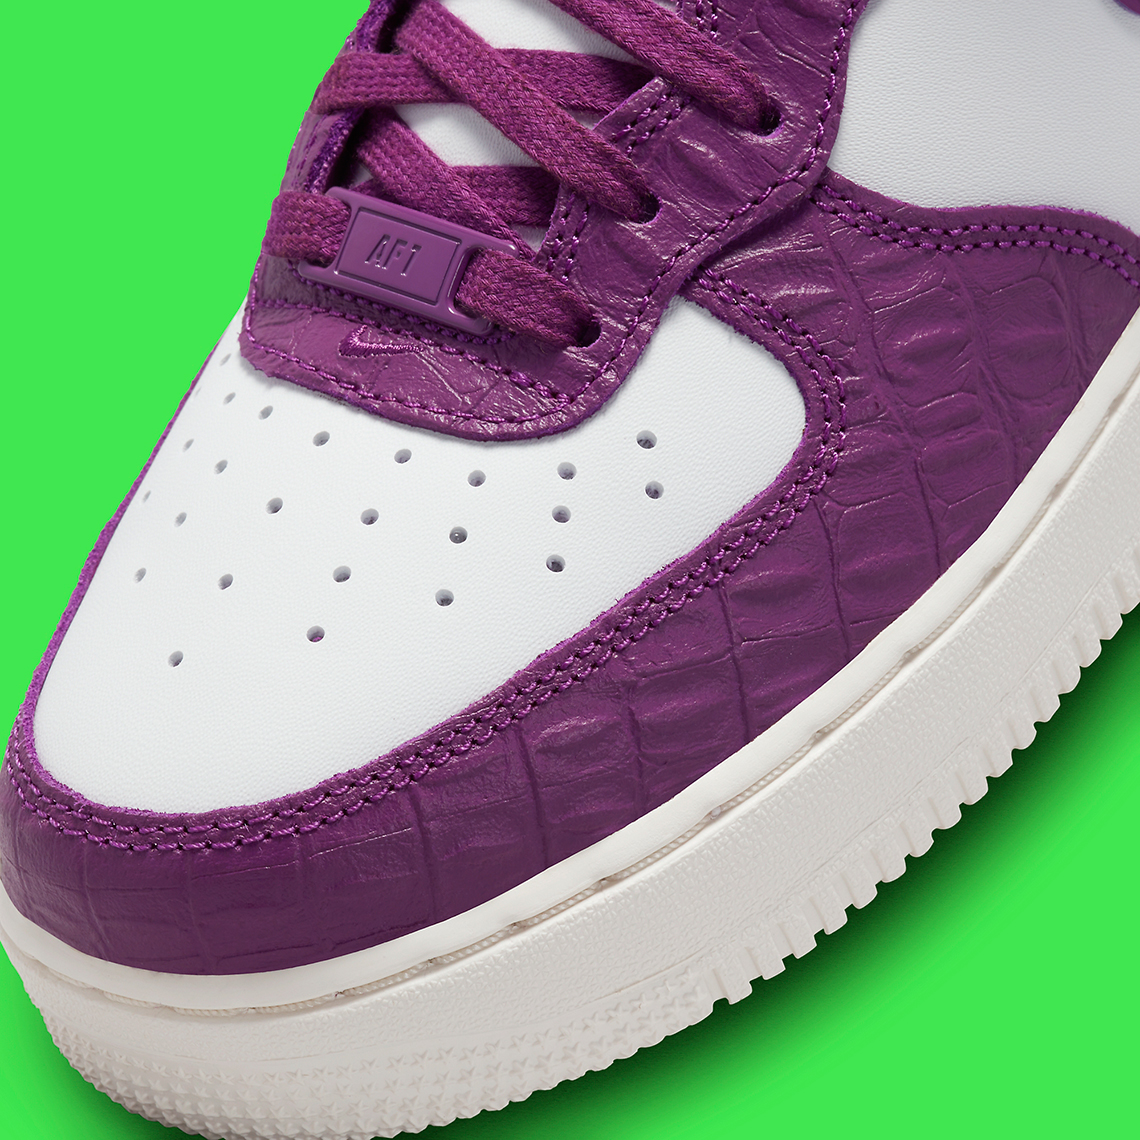 Nike Air Force 1s , Color Mauve, Size 10.5 for Sale in Yorktown, VA